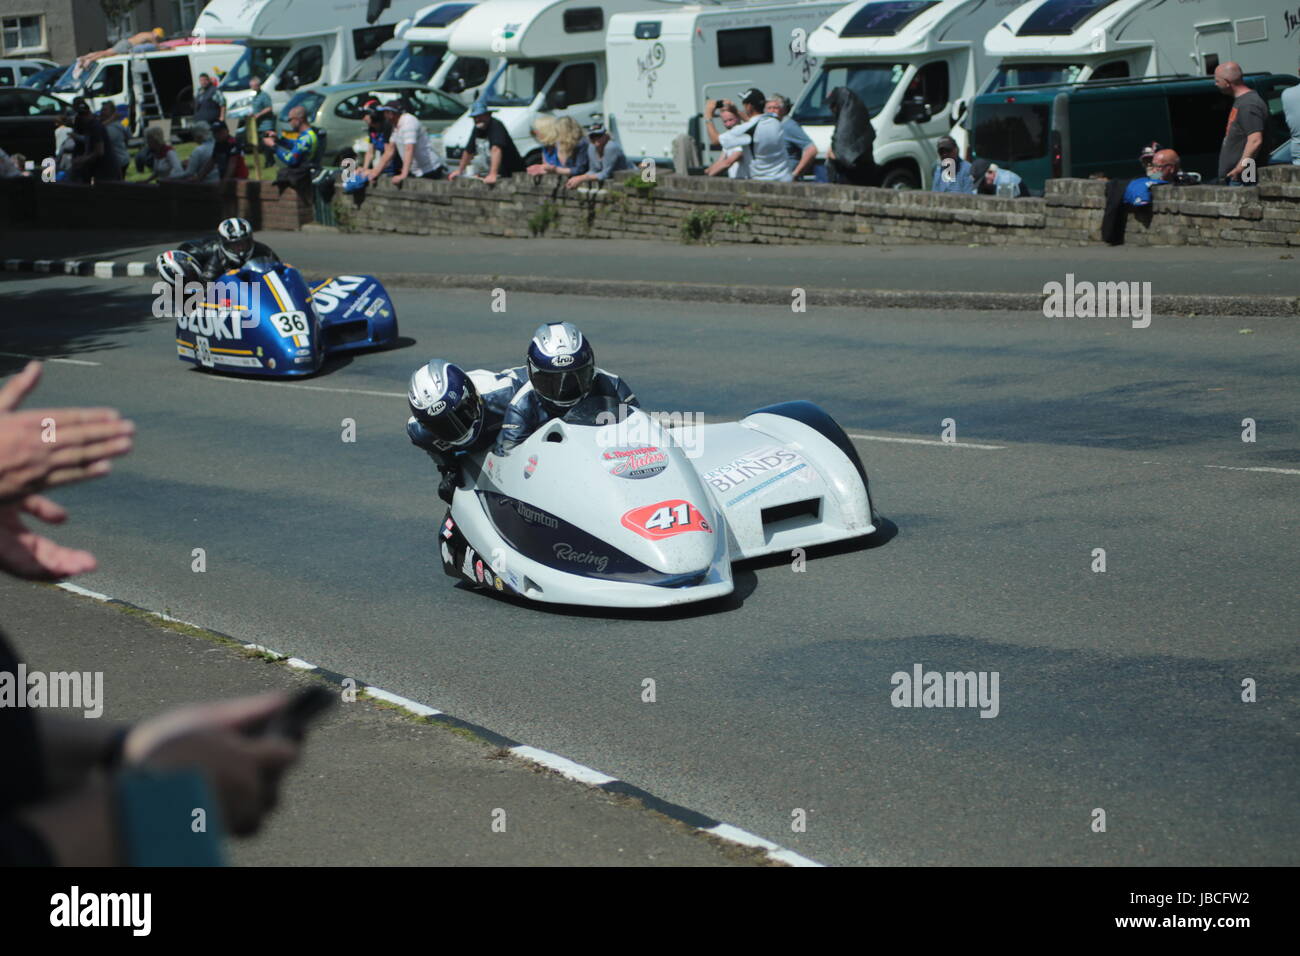 Isle Of Man, British Isles (UK). 9th June, 2017.  Exciting racing as number 36, Franck Barbier and Goulven Crochemore chase number 41 Kevin Thornton and Dave Dean through Cruickshank's Corner, Ramsey, Isle of Man, UK. Sure Sidecar TT Race 2. (Detailed competitor information: https://www.iomtt.com/TT-Database.aspx) Credit: Louisa Jane Bawden/Alamy Live News. Stock Photo